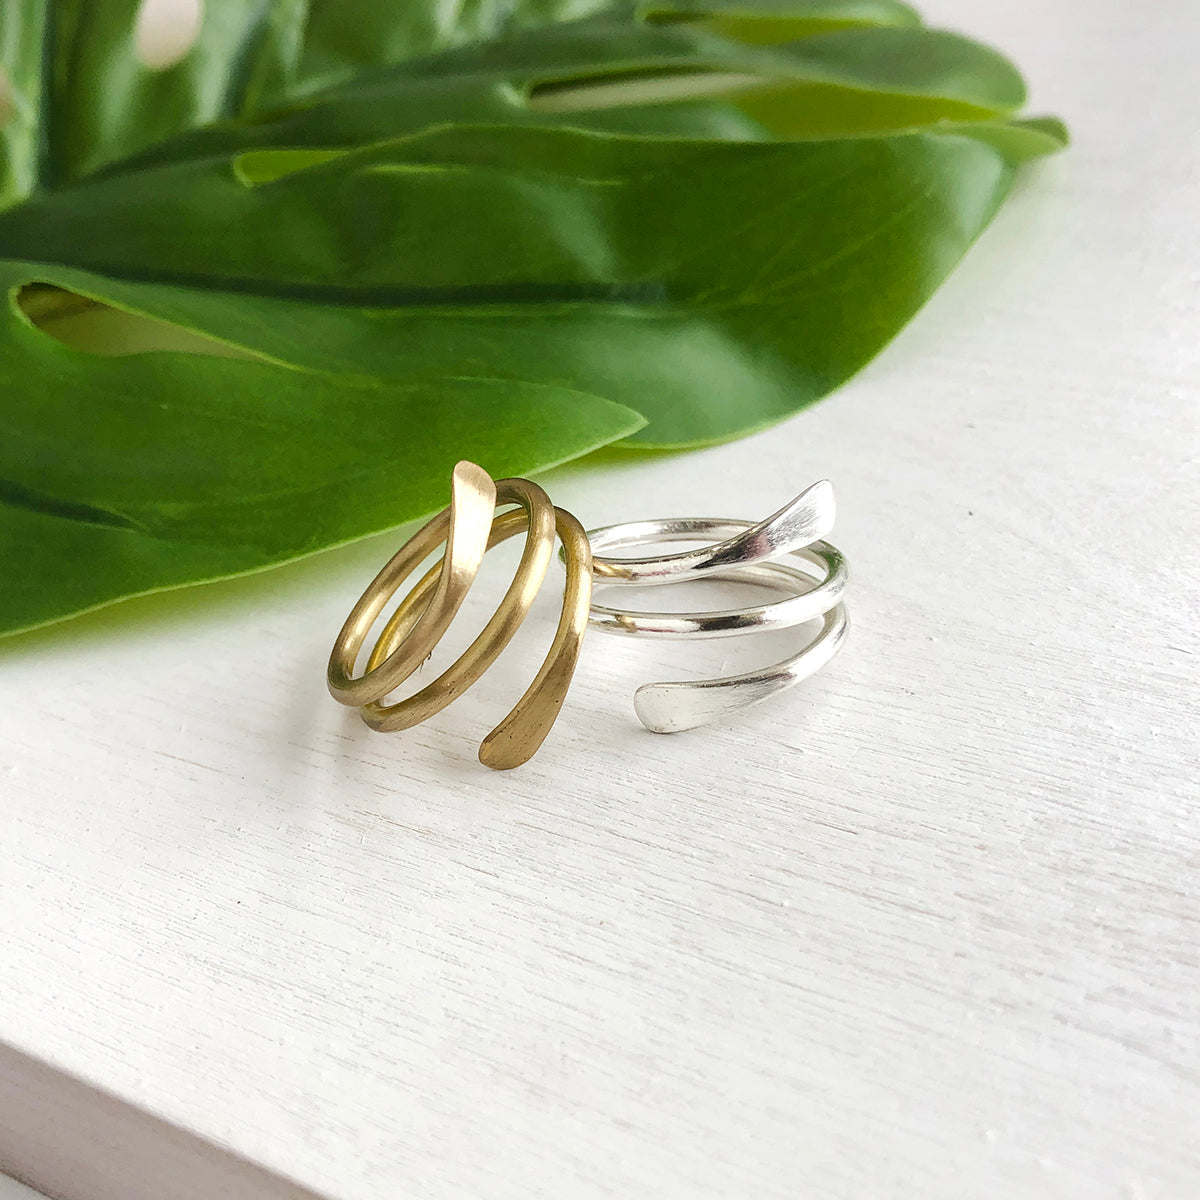 A gold and silver Coiled Wrap Ring